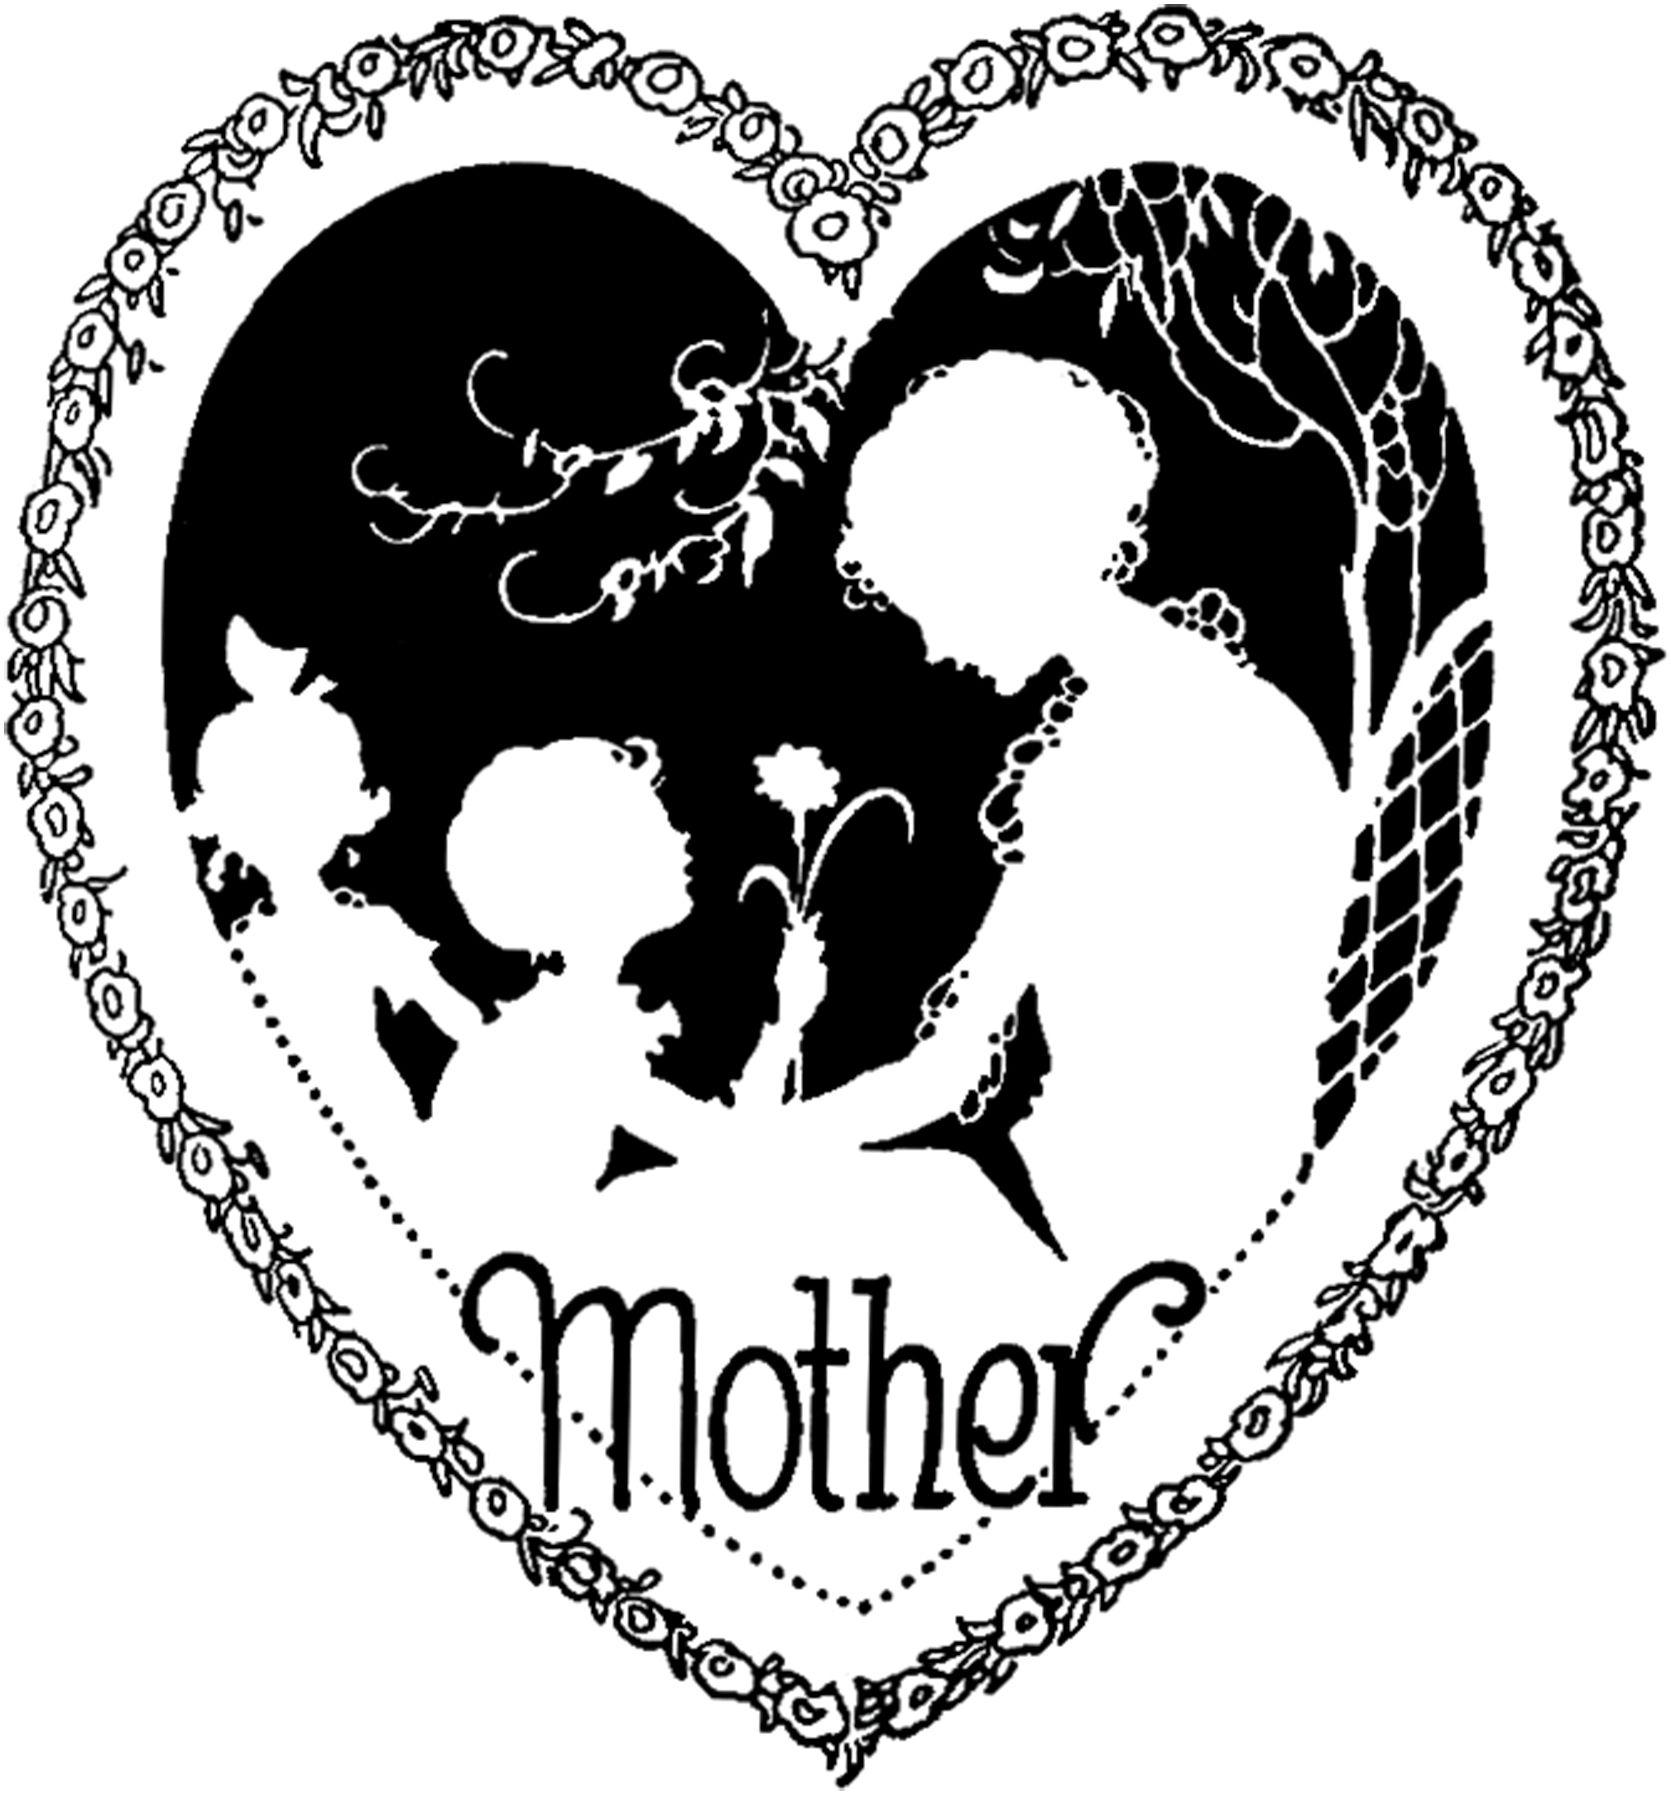 Black Mother's Day Logo - Beautiful Vintage Mother's Day Heart Image! - The Graphics Fairy